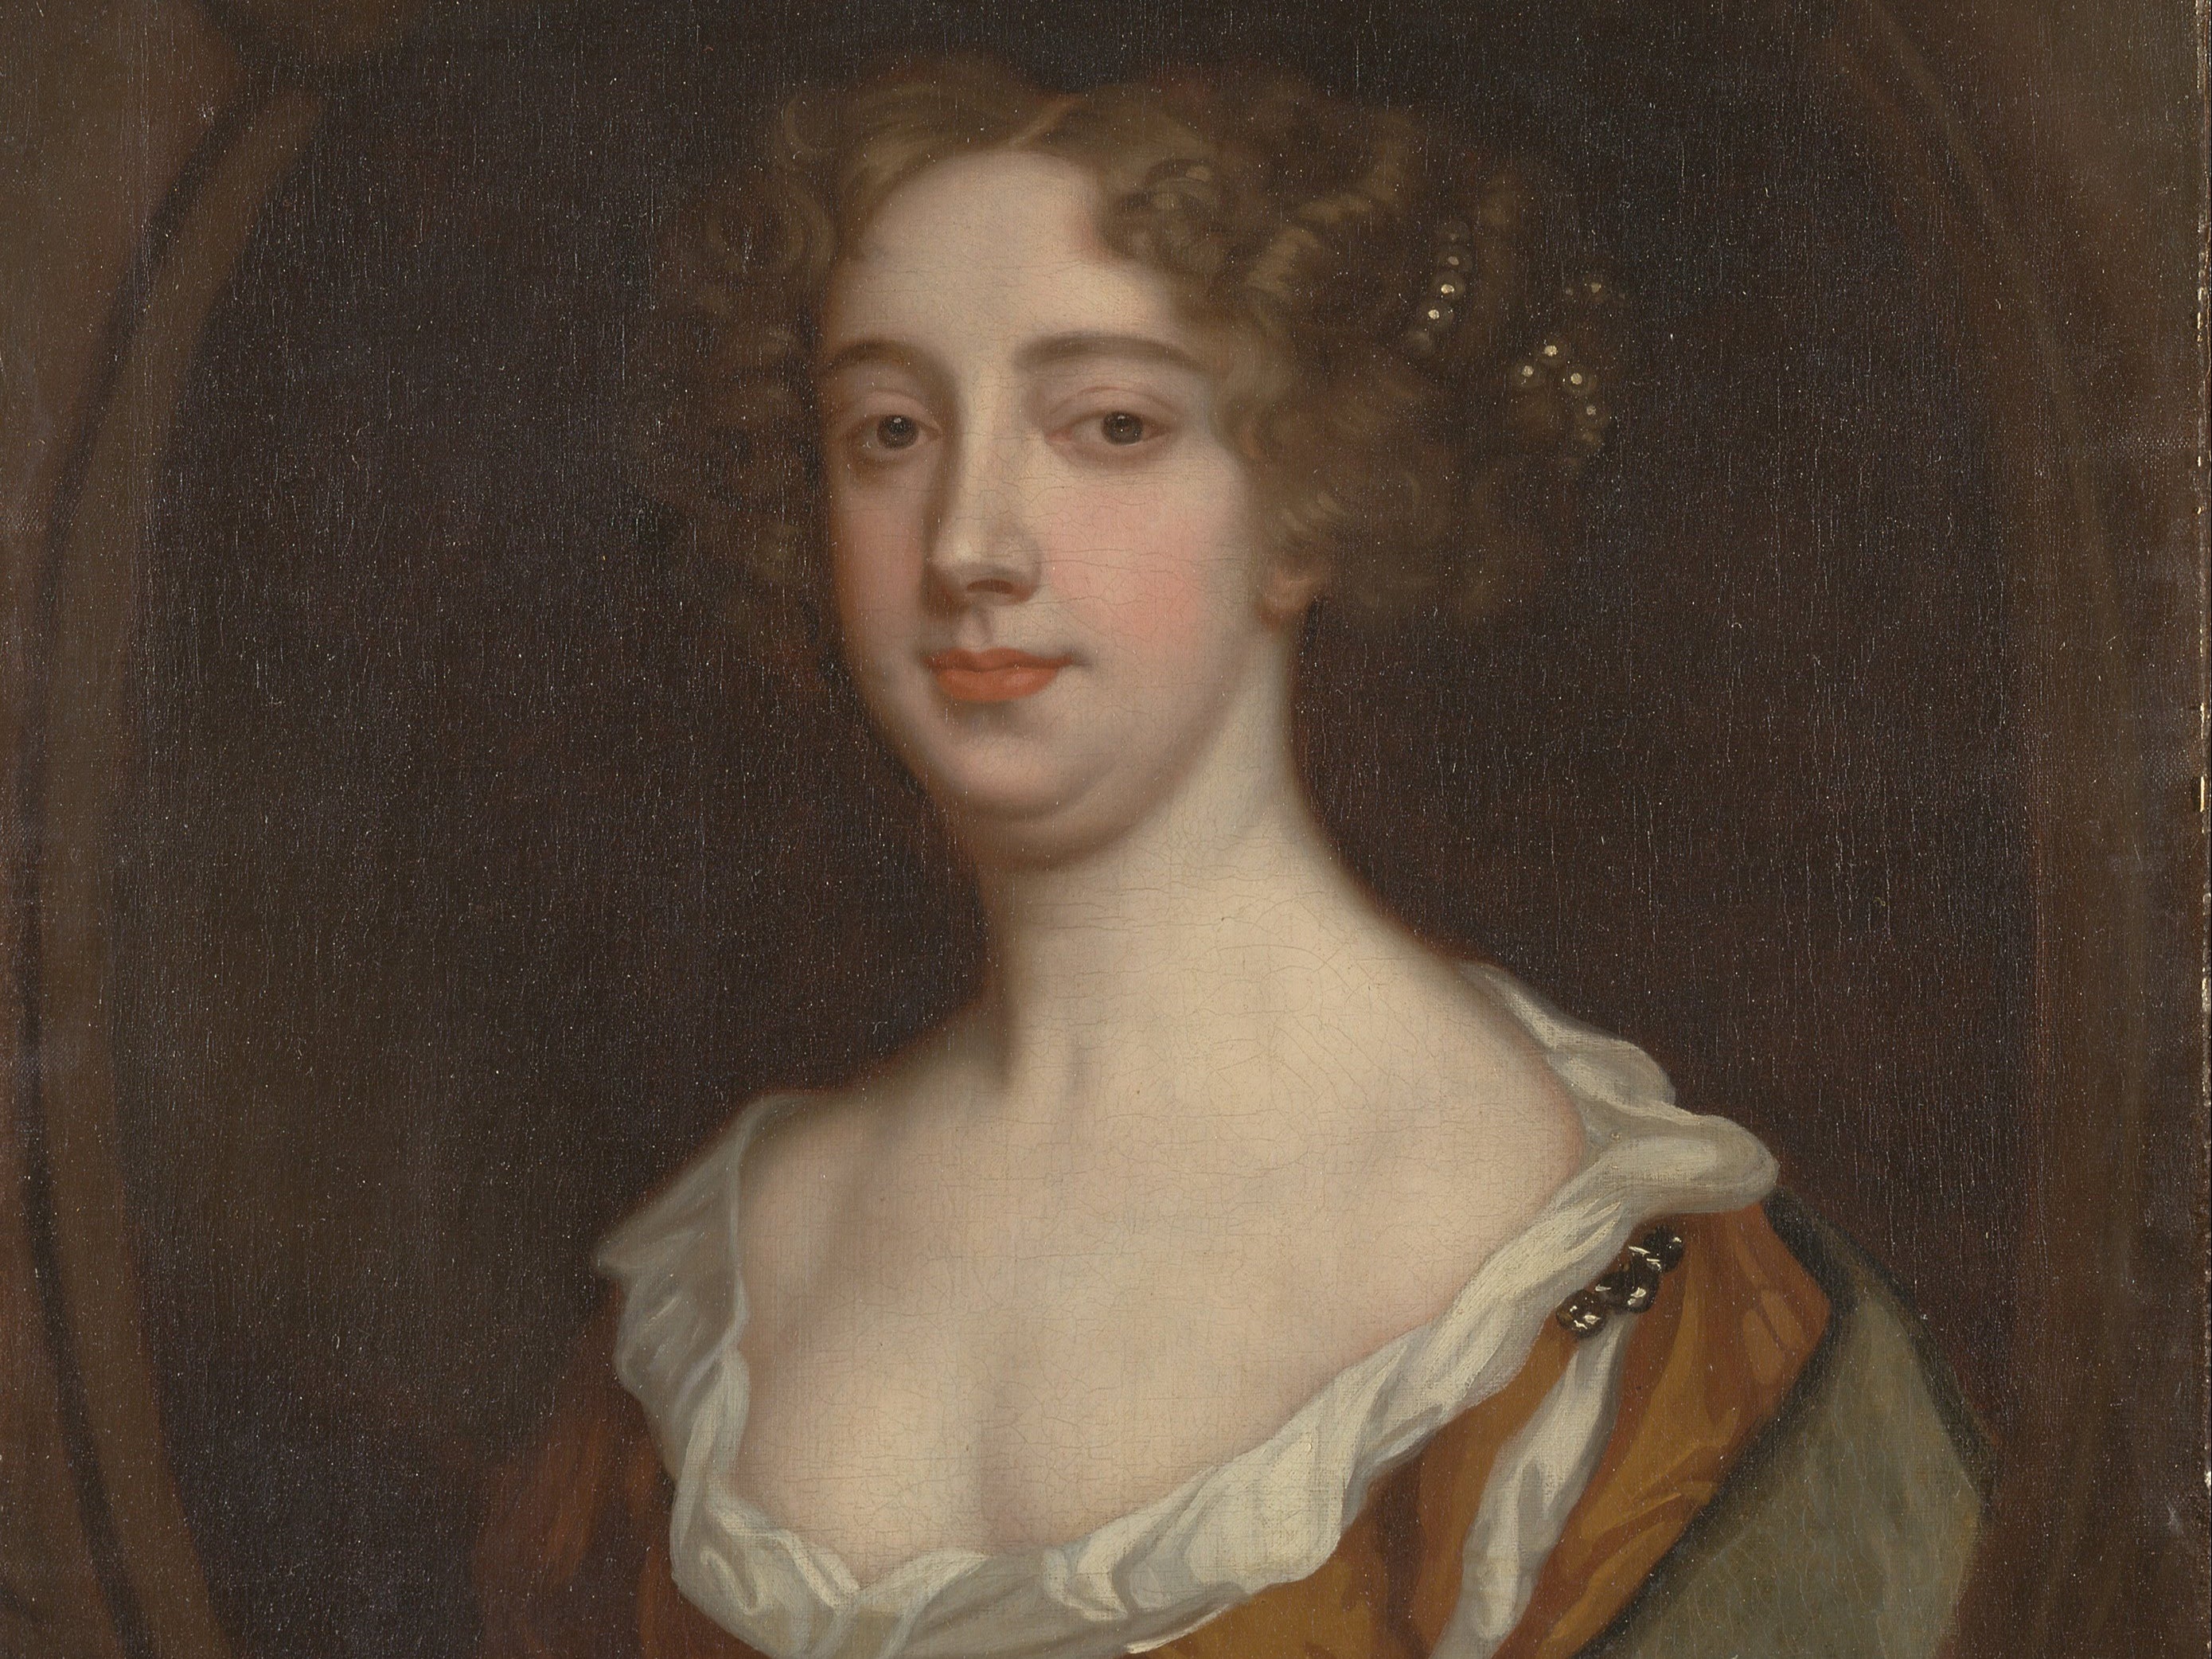 An Aphra Behn play that was deemed “radical and controversial” will be performed for the first time in 350 years.